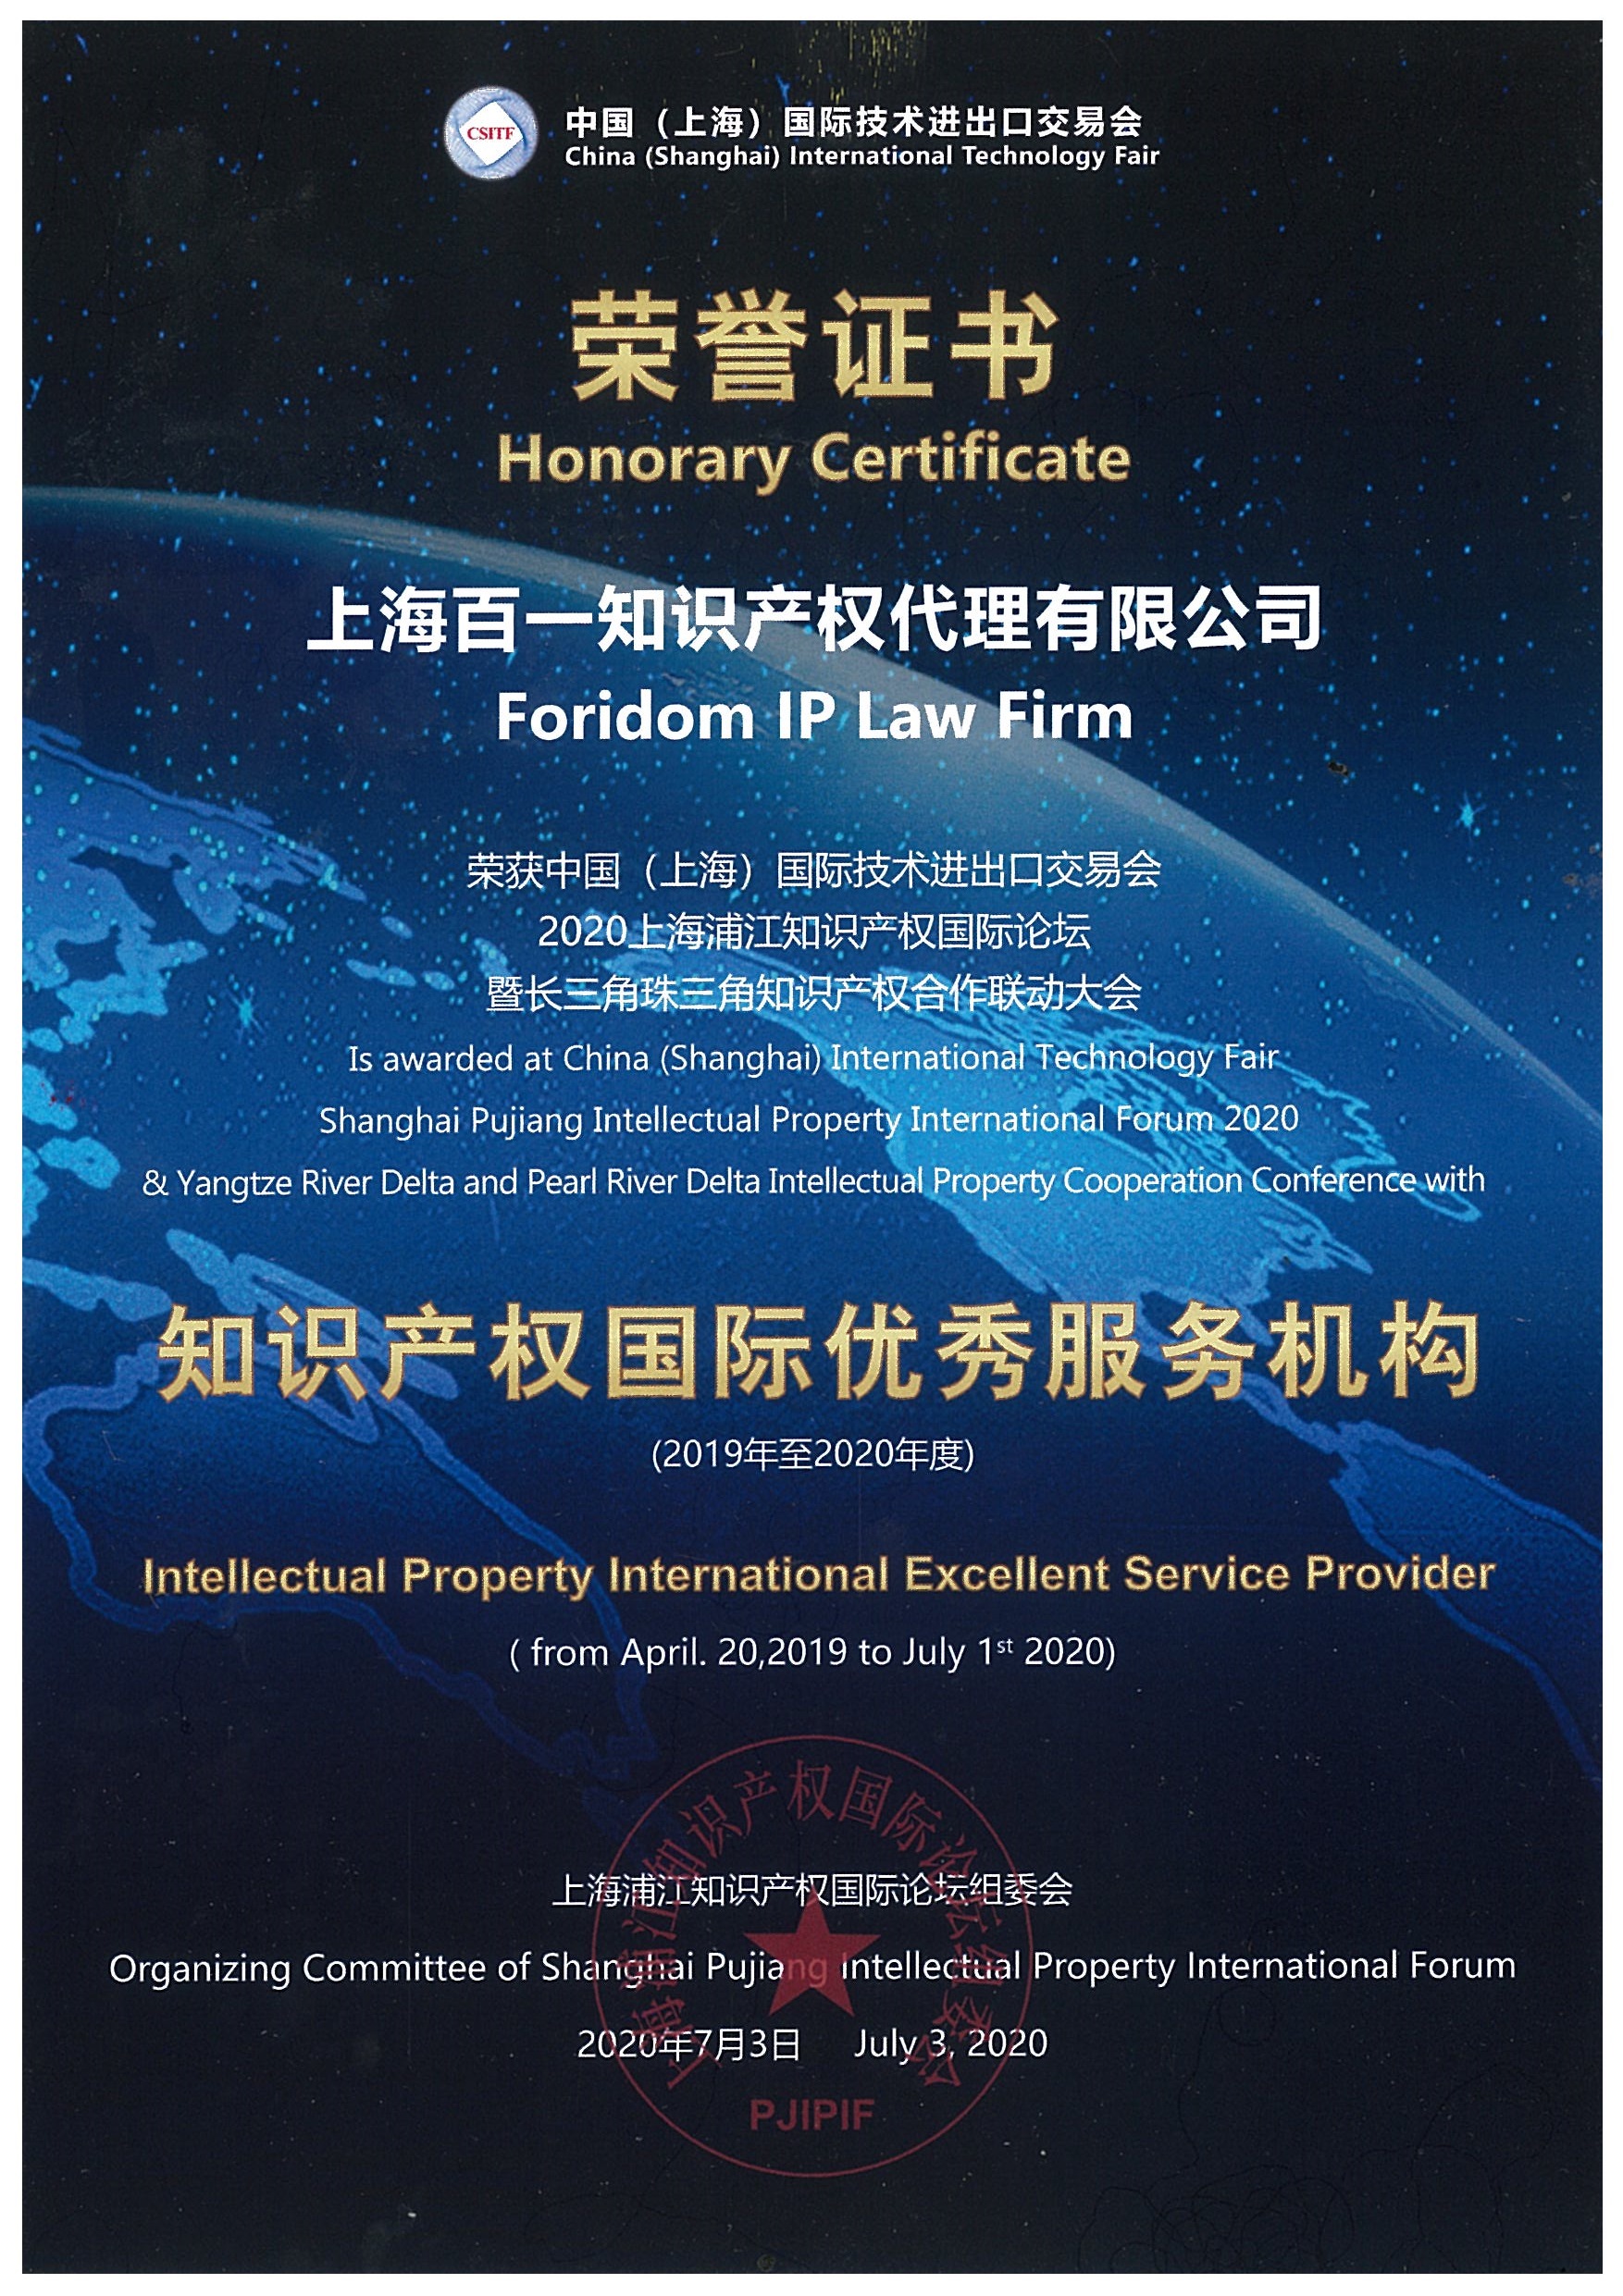 2019-2020 Intellectual Property International Excellent Service Provider